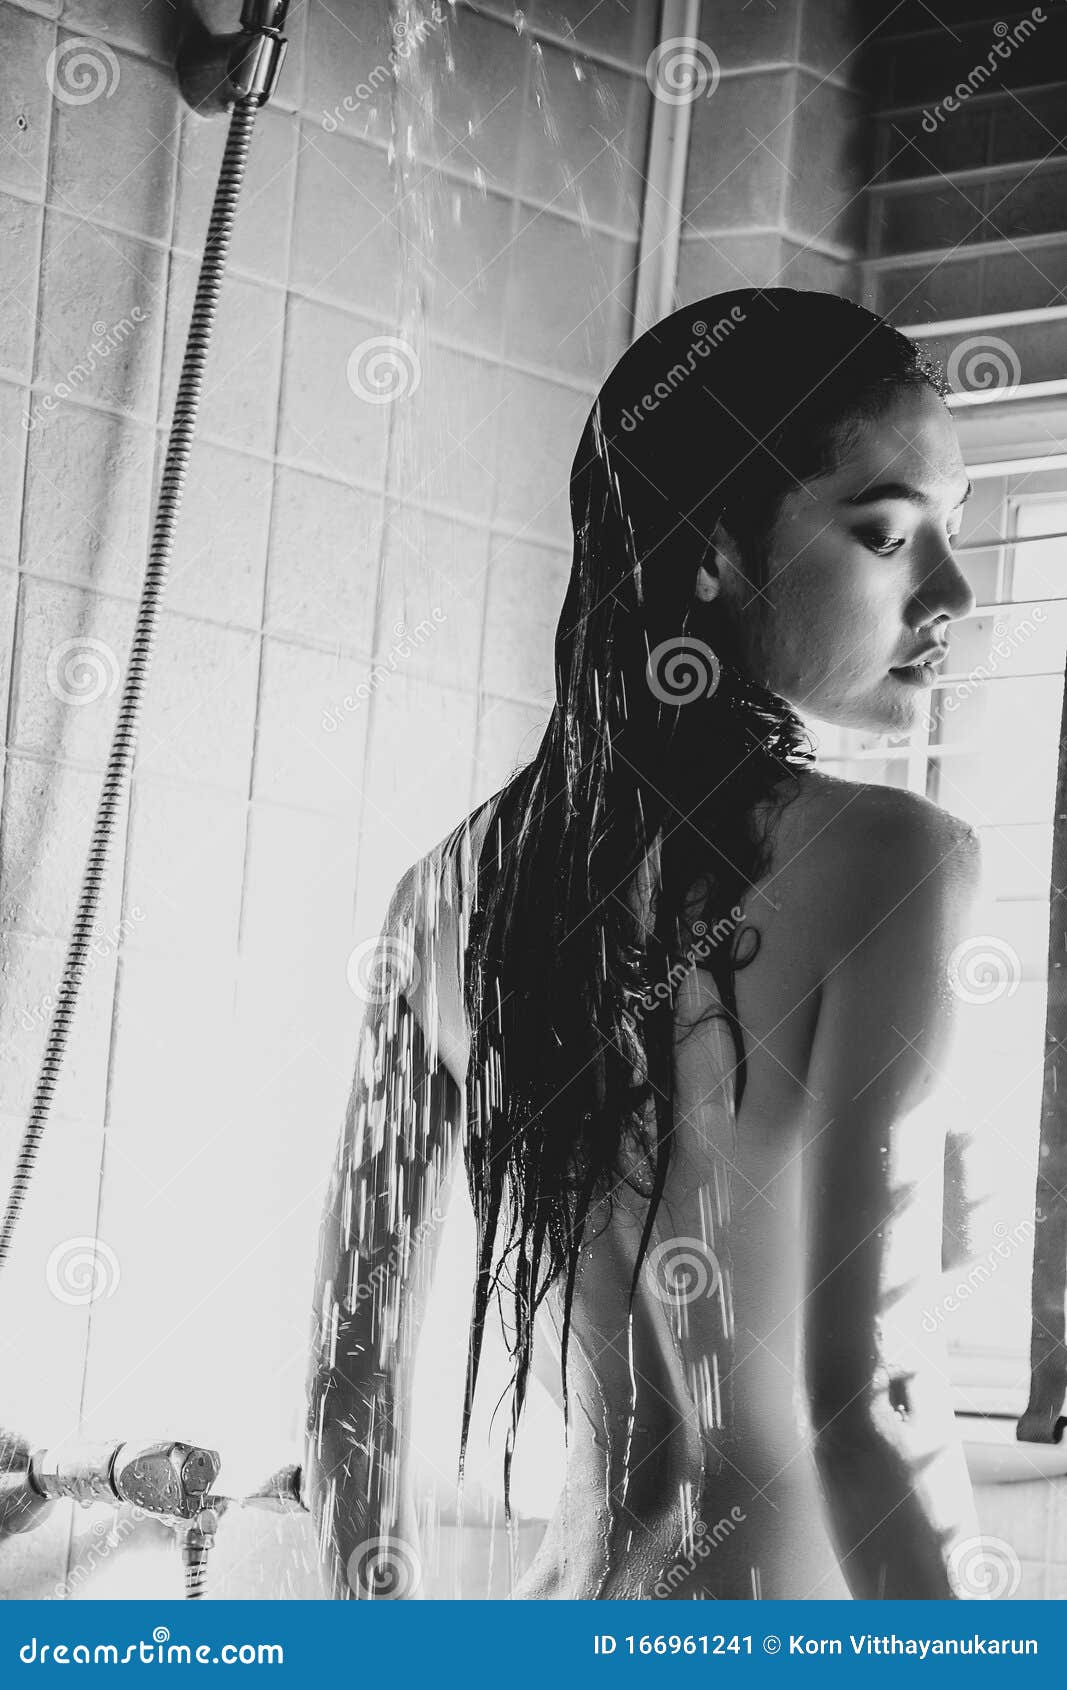 danny mazur add sexy naked women in the shower photo